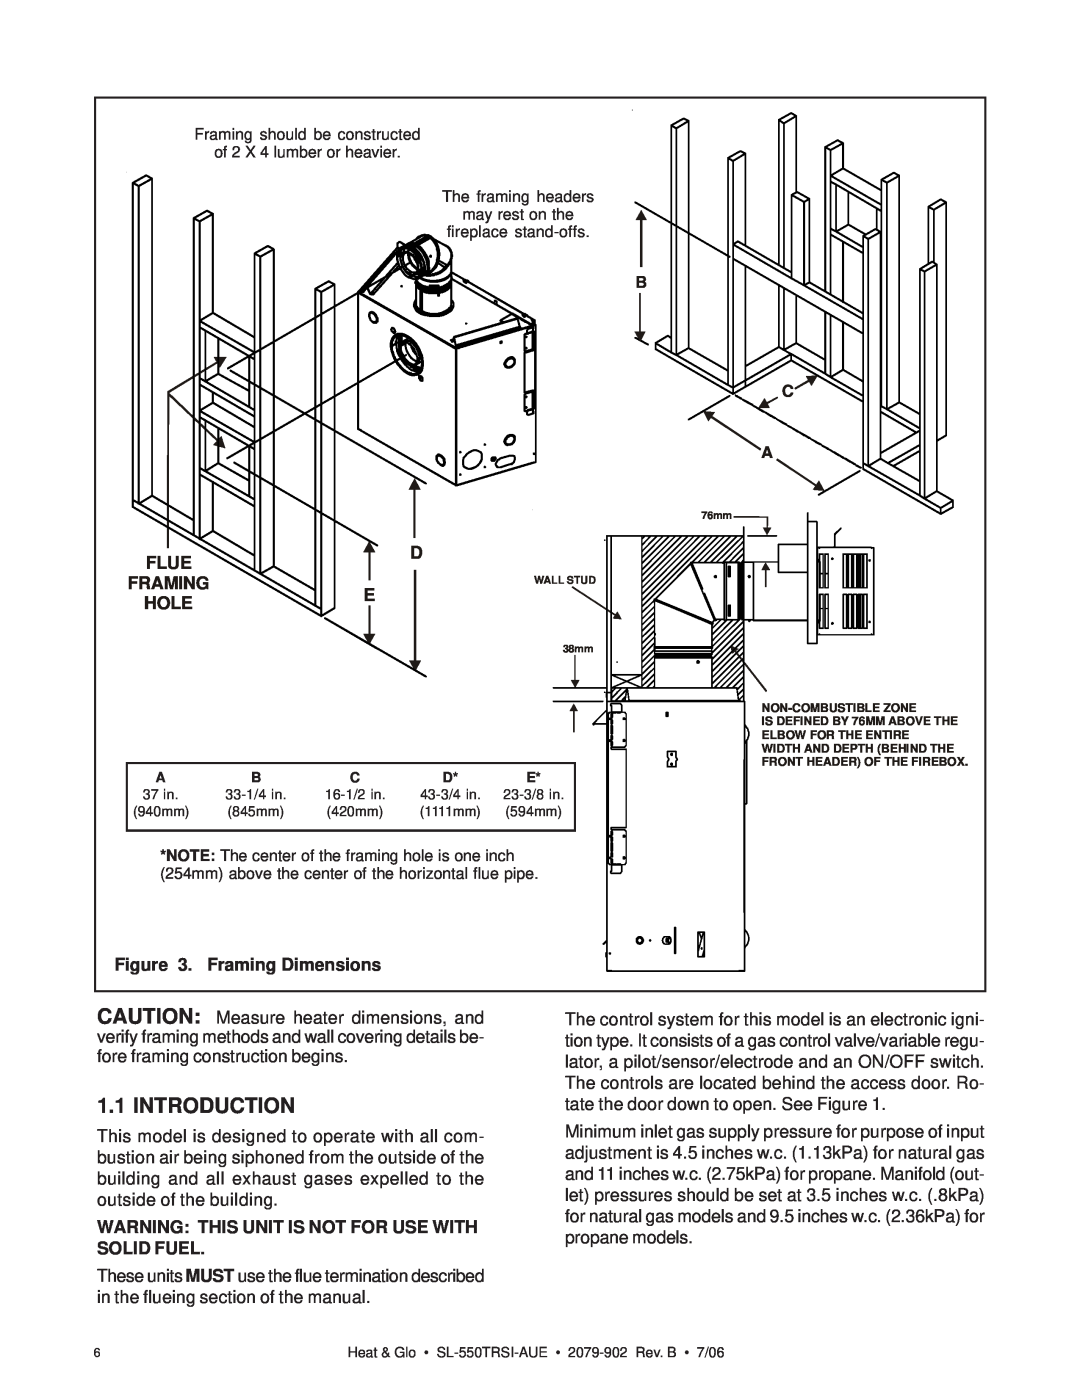 Hearth and Home Technologies SL-550TRSI-AUE manual Introduction, Flue, Hole, Framing Dimensions 